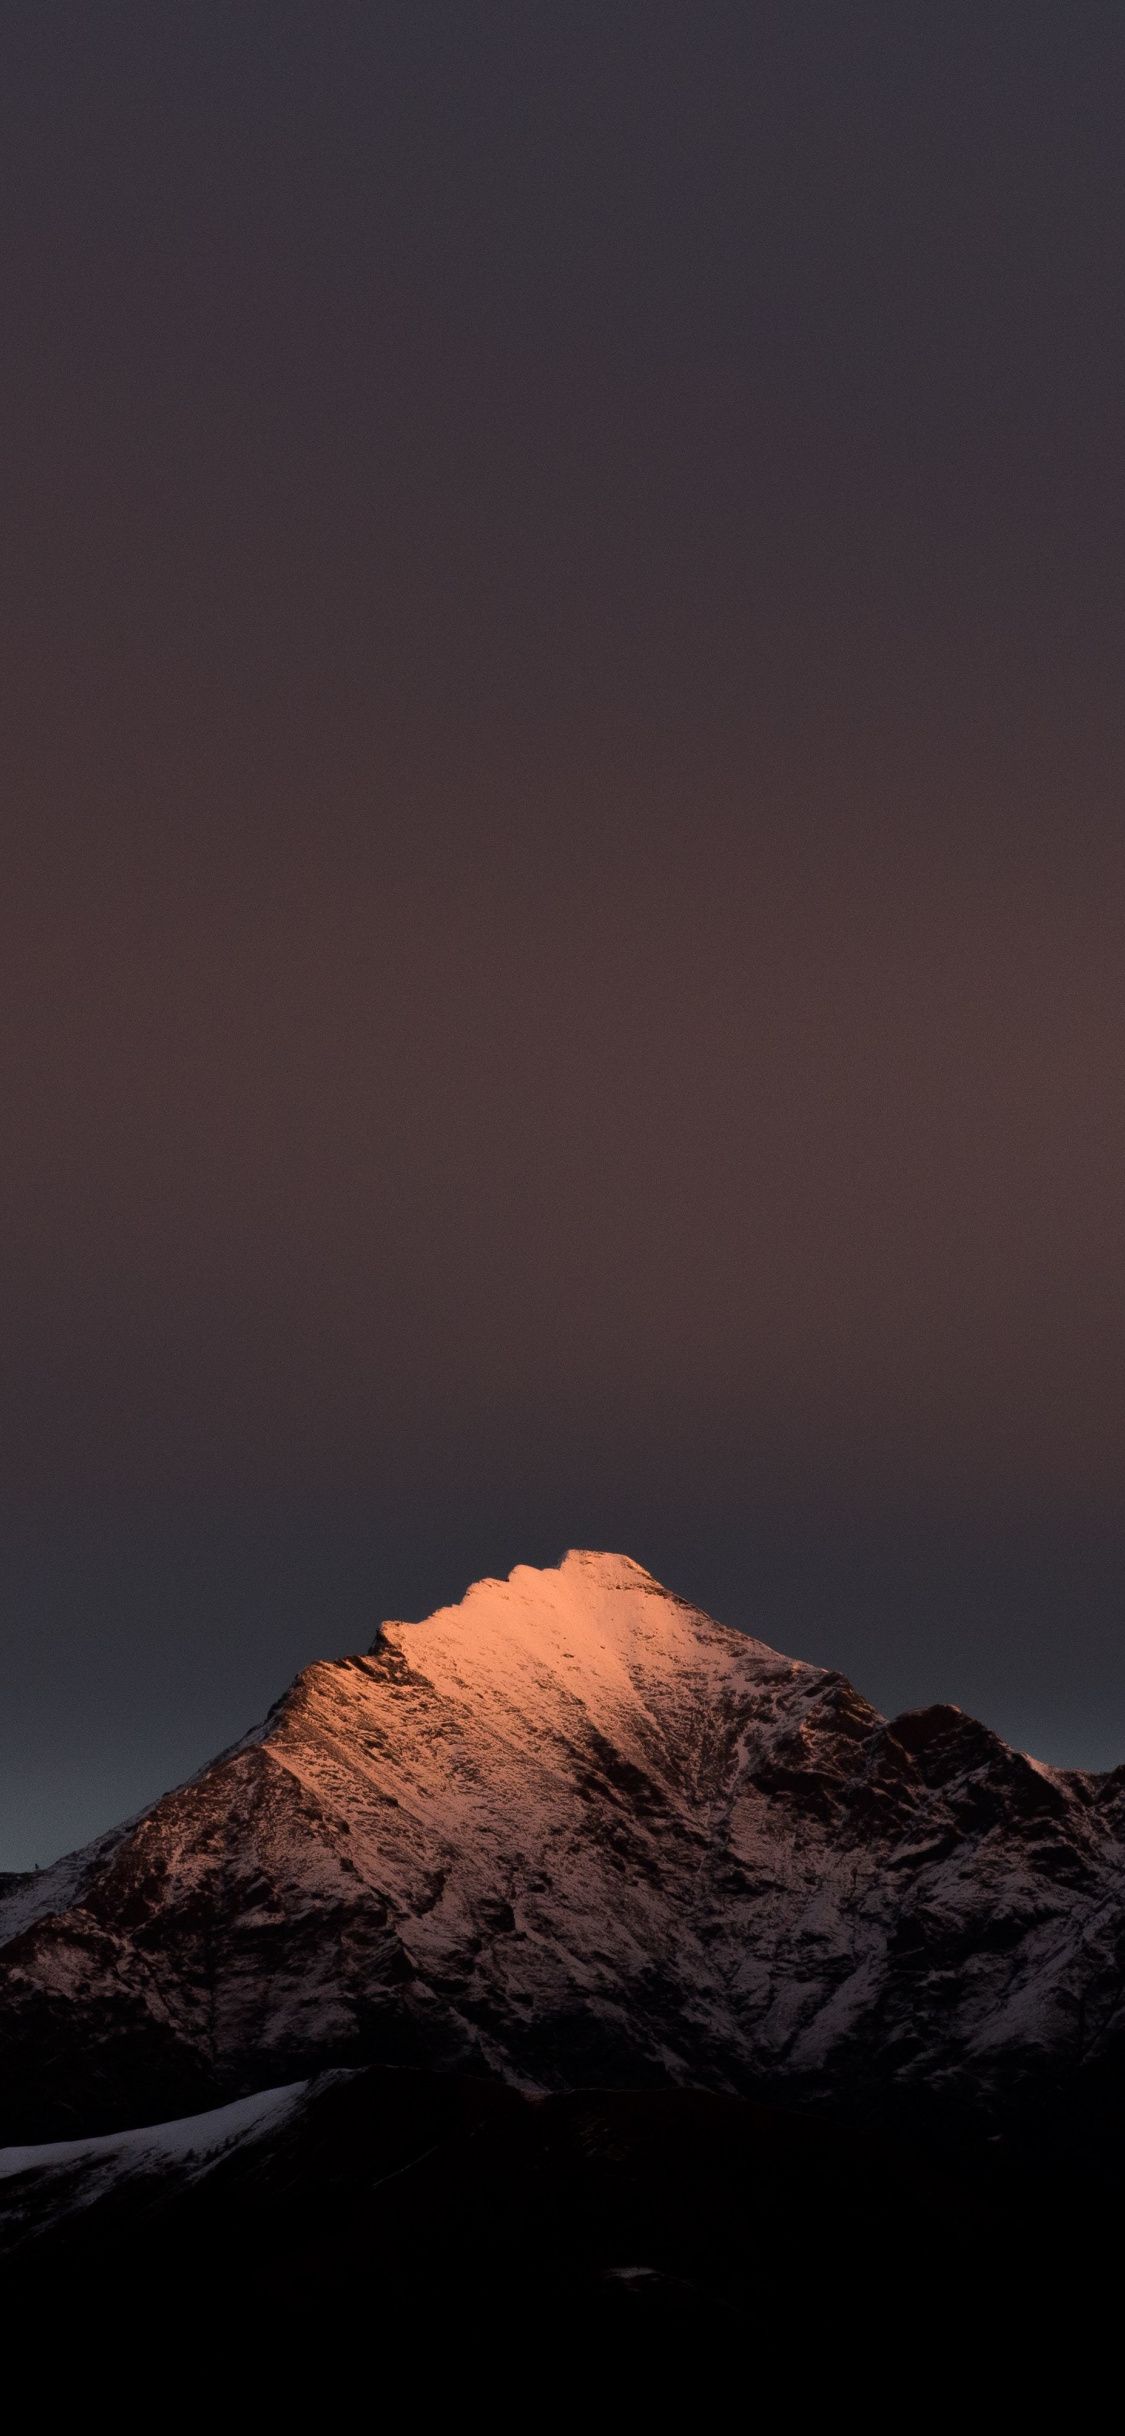 A mountain with snow on it at night - Clean